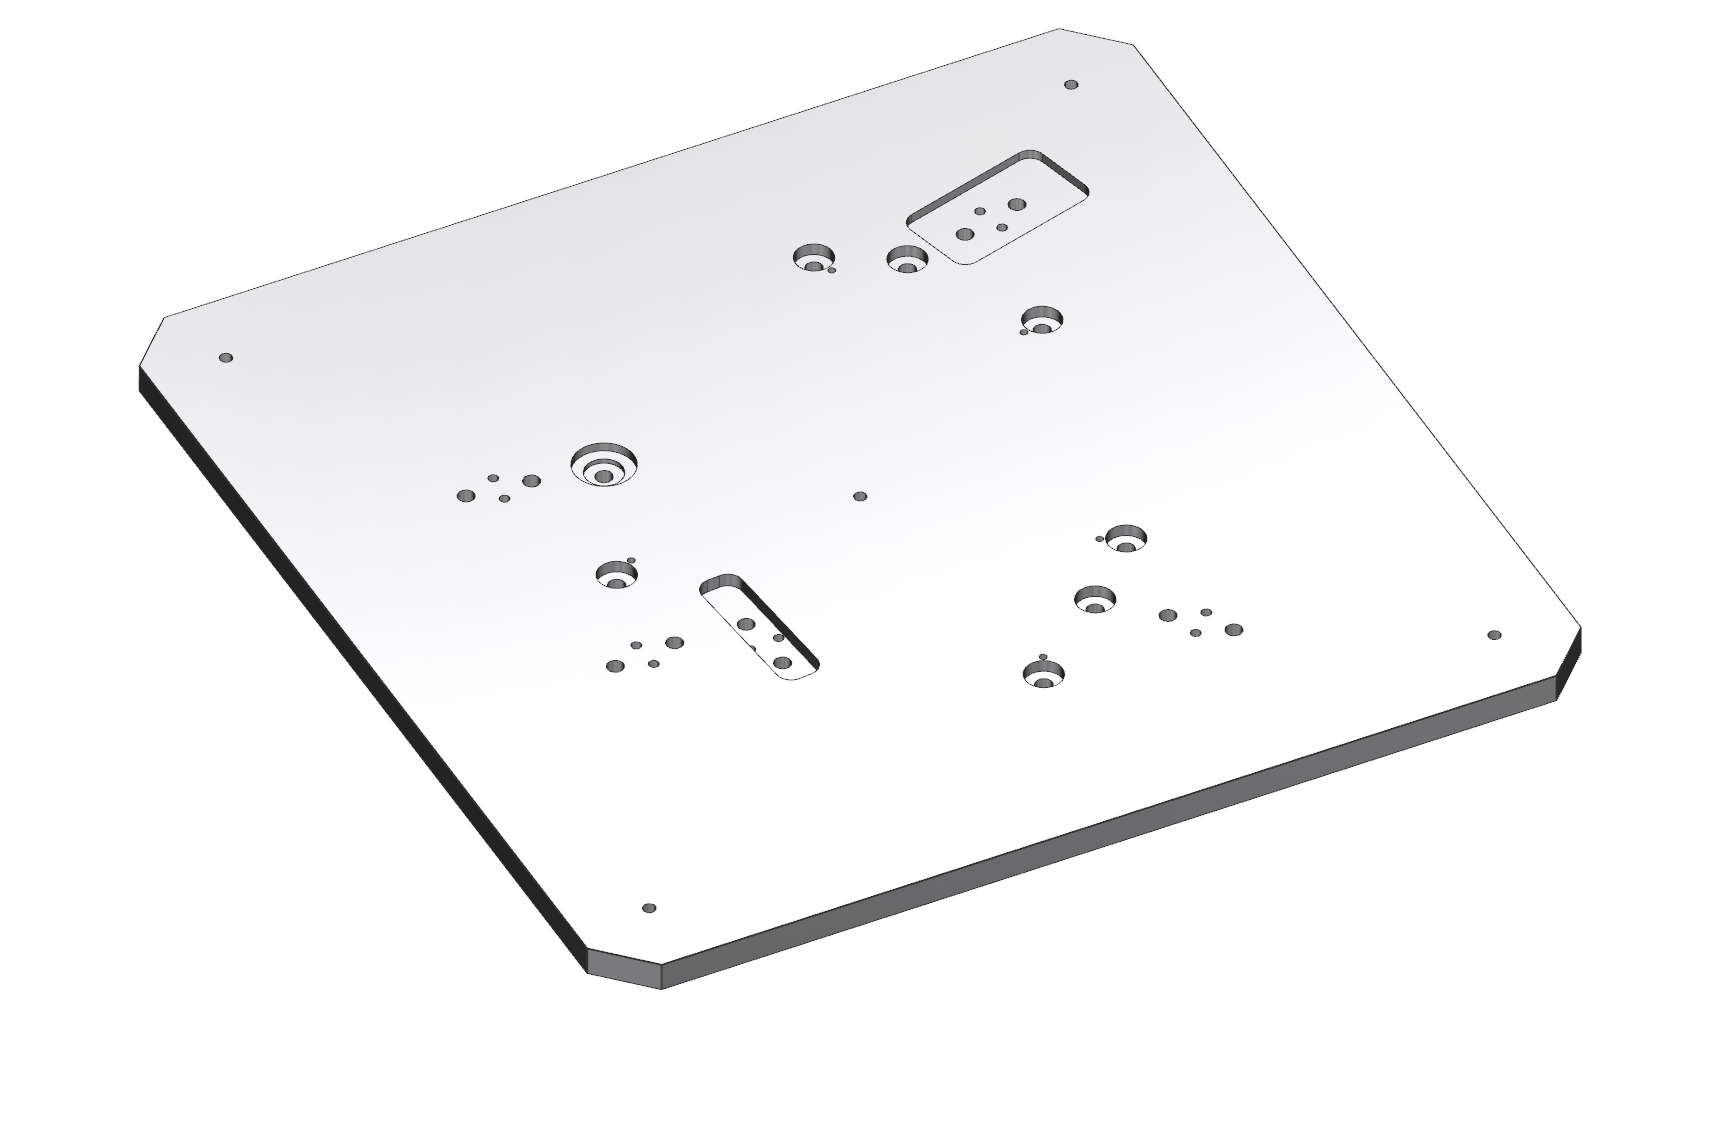 Innoclicker clamping plate with drilled hole pattern